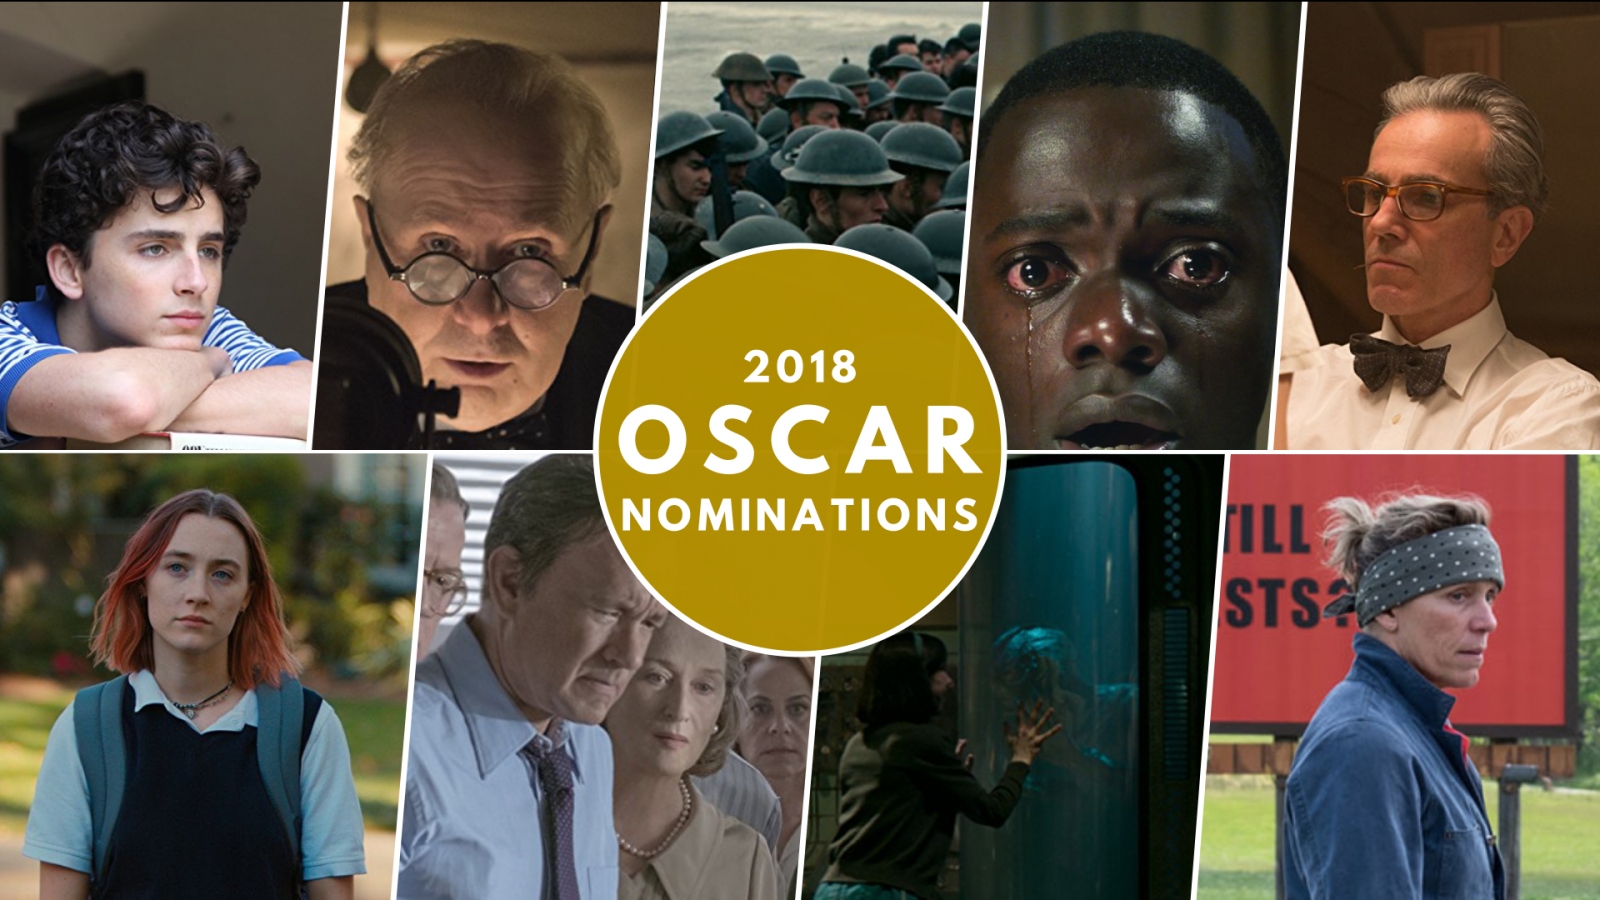 Oscar nominations 2018 full list: Shape Of Water leads race with 13 nods1600 x 900